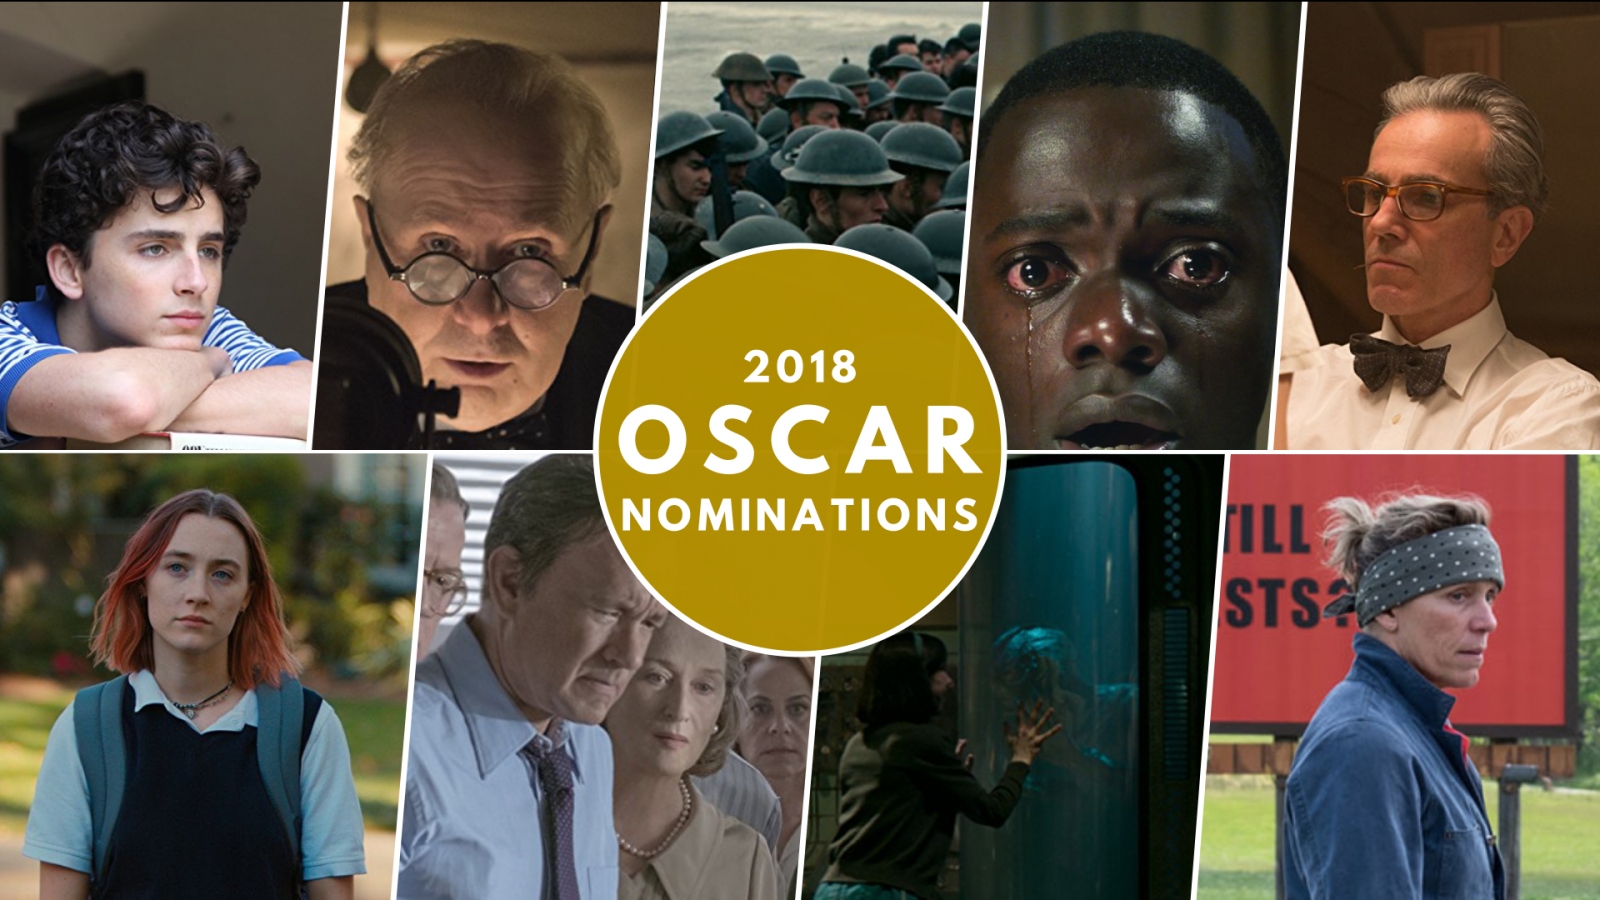 Oscar nominations 2018 full list: Shape Of Water leads race with 13 nods1600 x 900